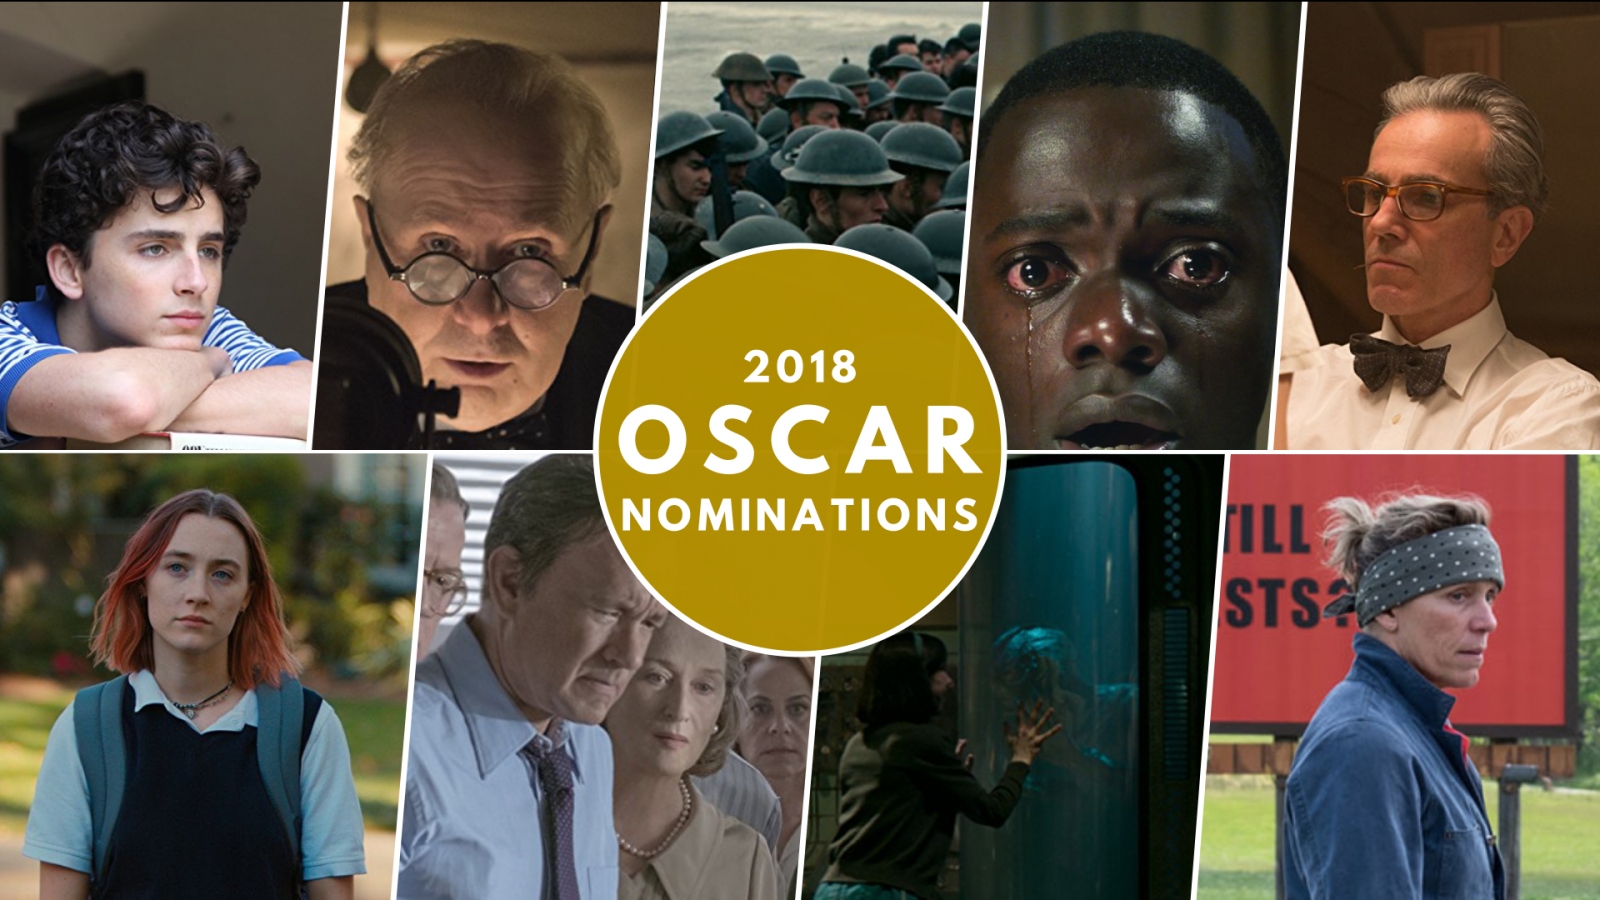 Oscar nominations 2018 full list: Shape Of Water leads race with 13 nods1600 x 900